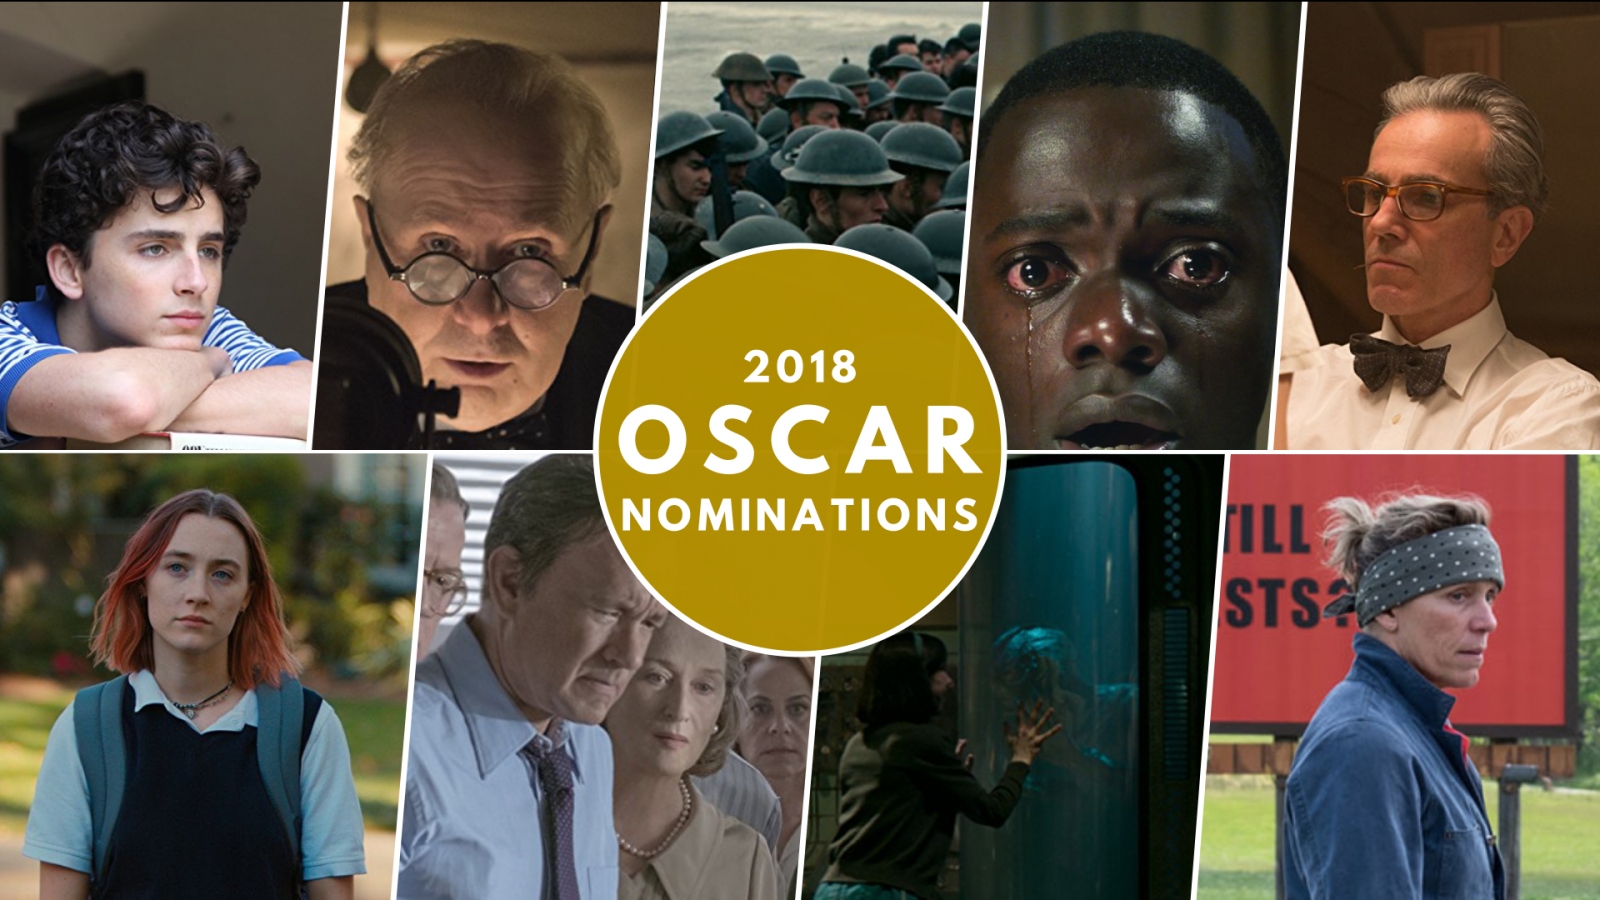 Oscar nominations 2018 full list: Shape Of Water leads race with 13 nods1600 x 900